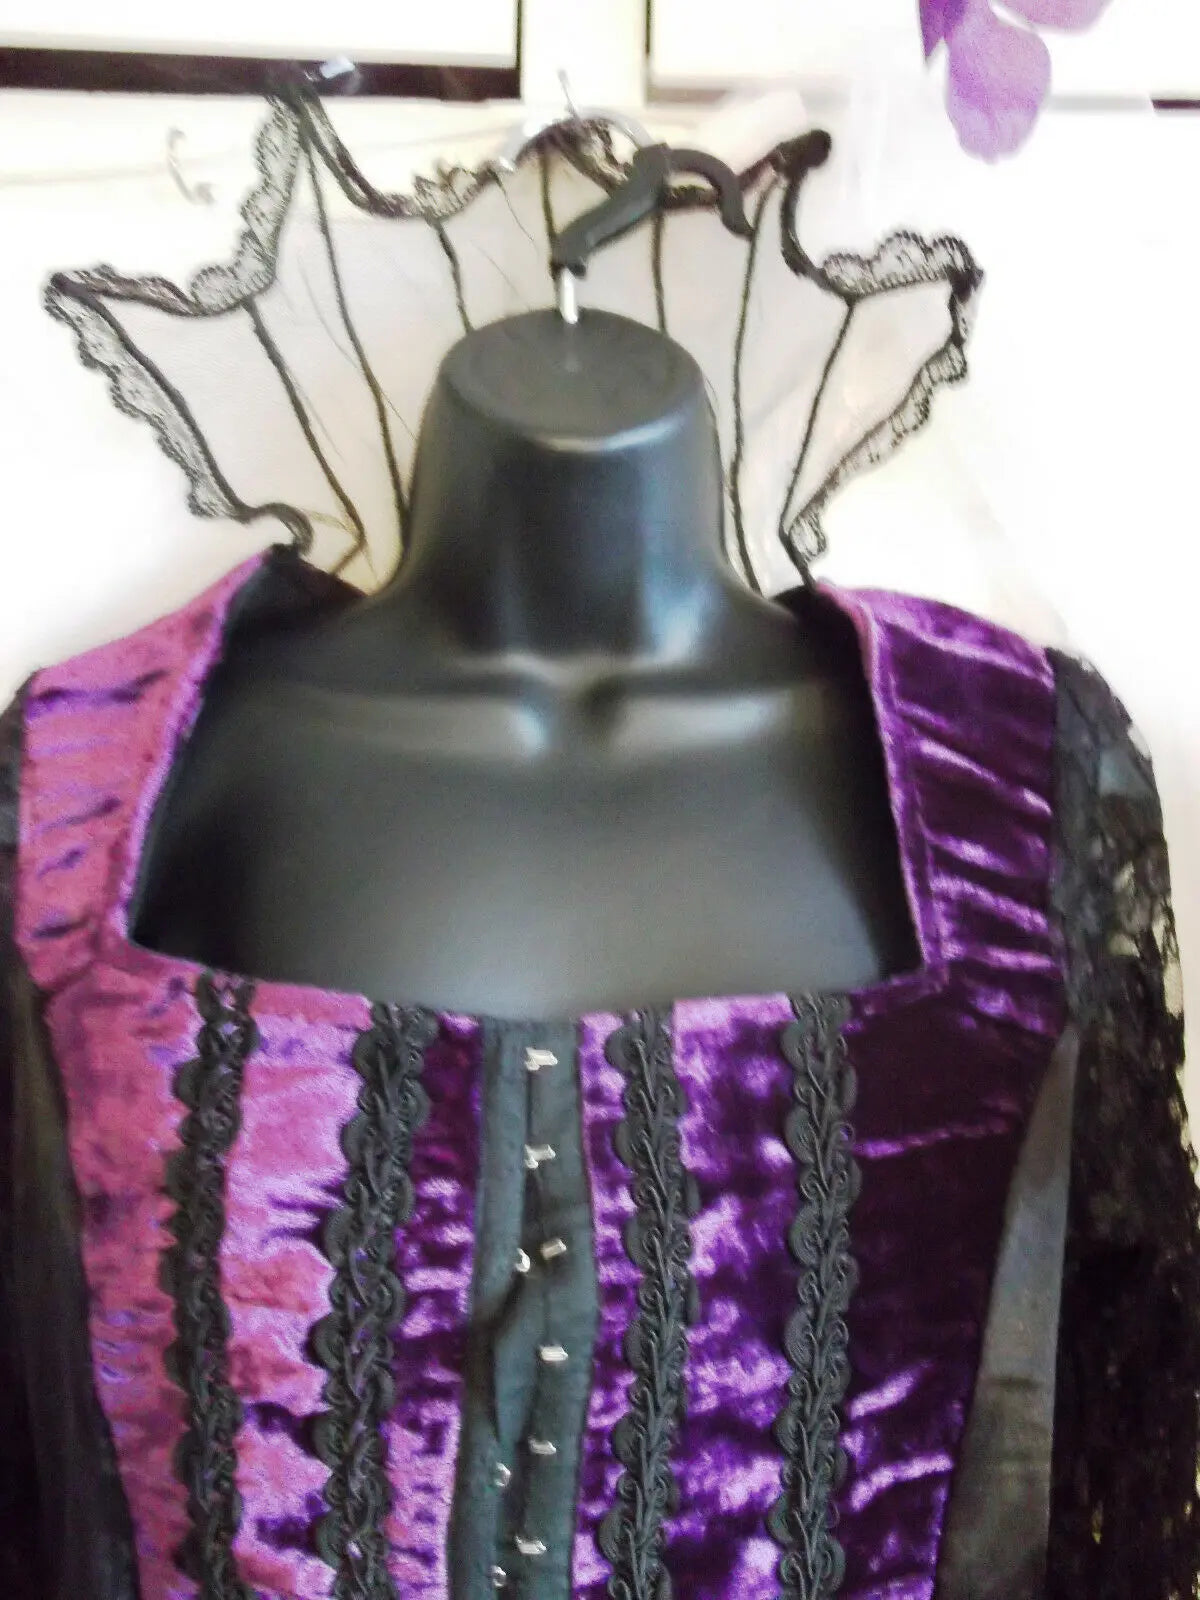 raven size S purple&black evil queen bodice top -lace sleeves,high lace collar raven